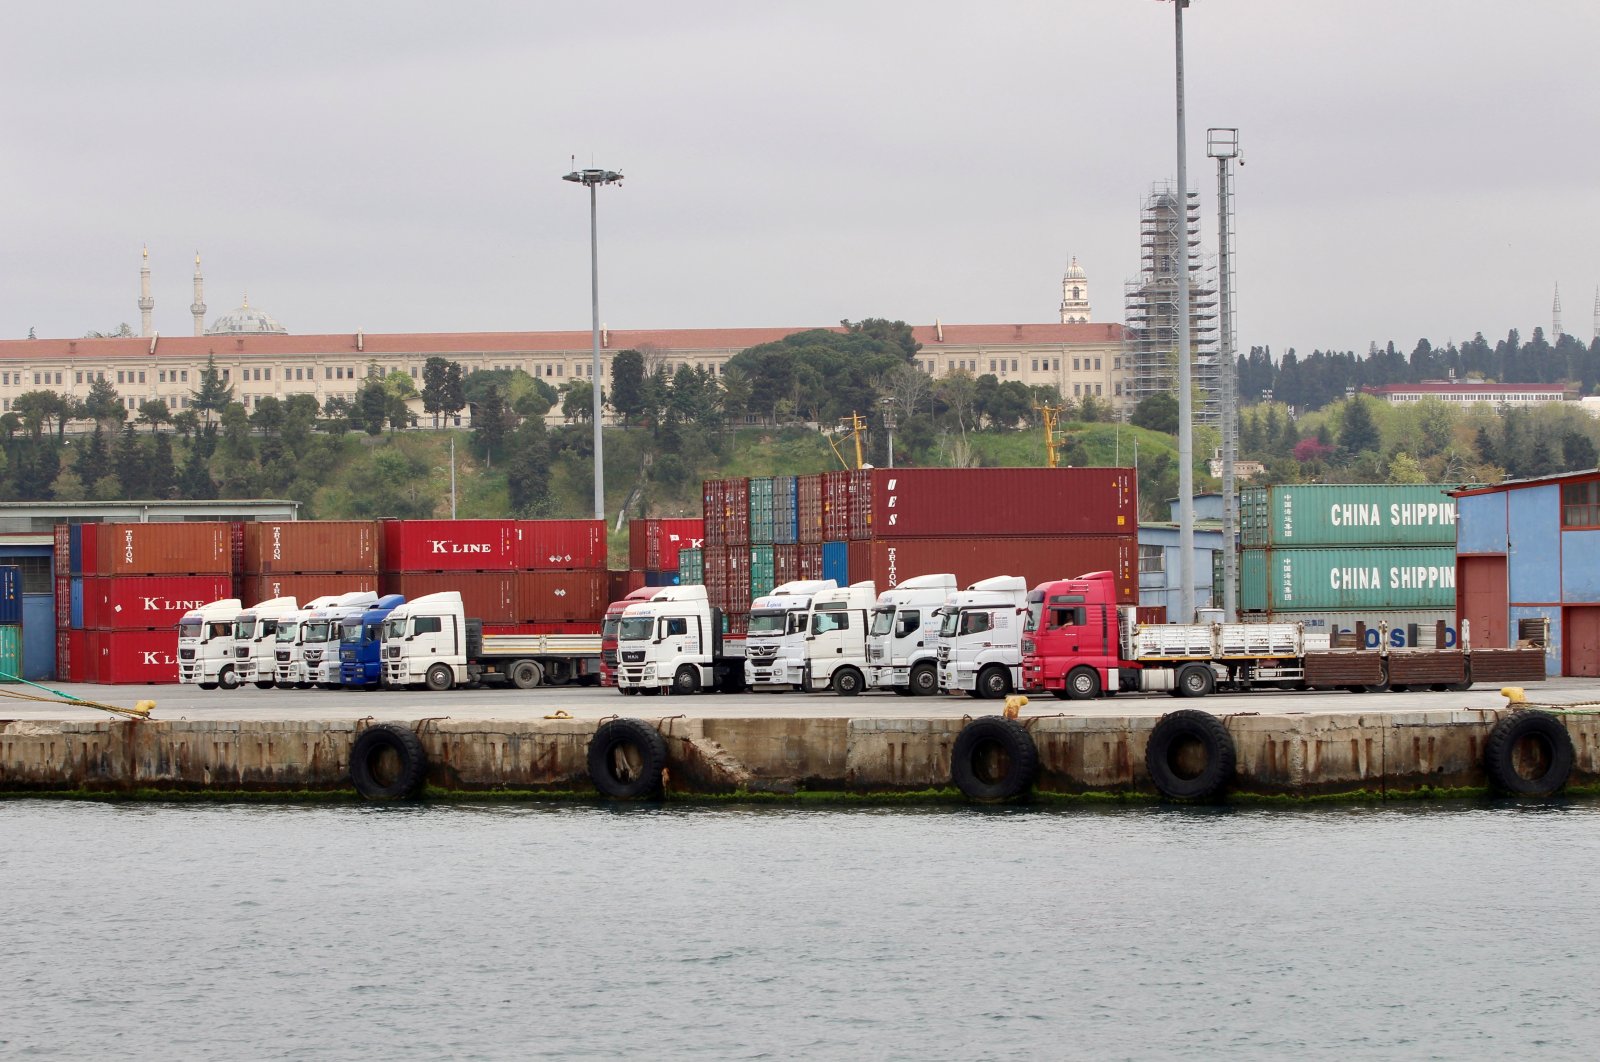 Trucks and shipping containers are pictured at Haydarpaşa Port in Istanbul, Turkey, April 18, 2018. (Reuters Photo)